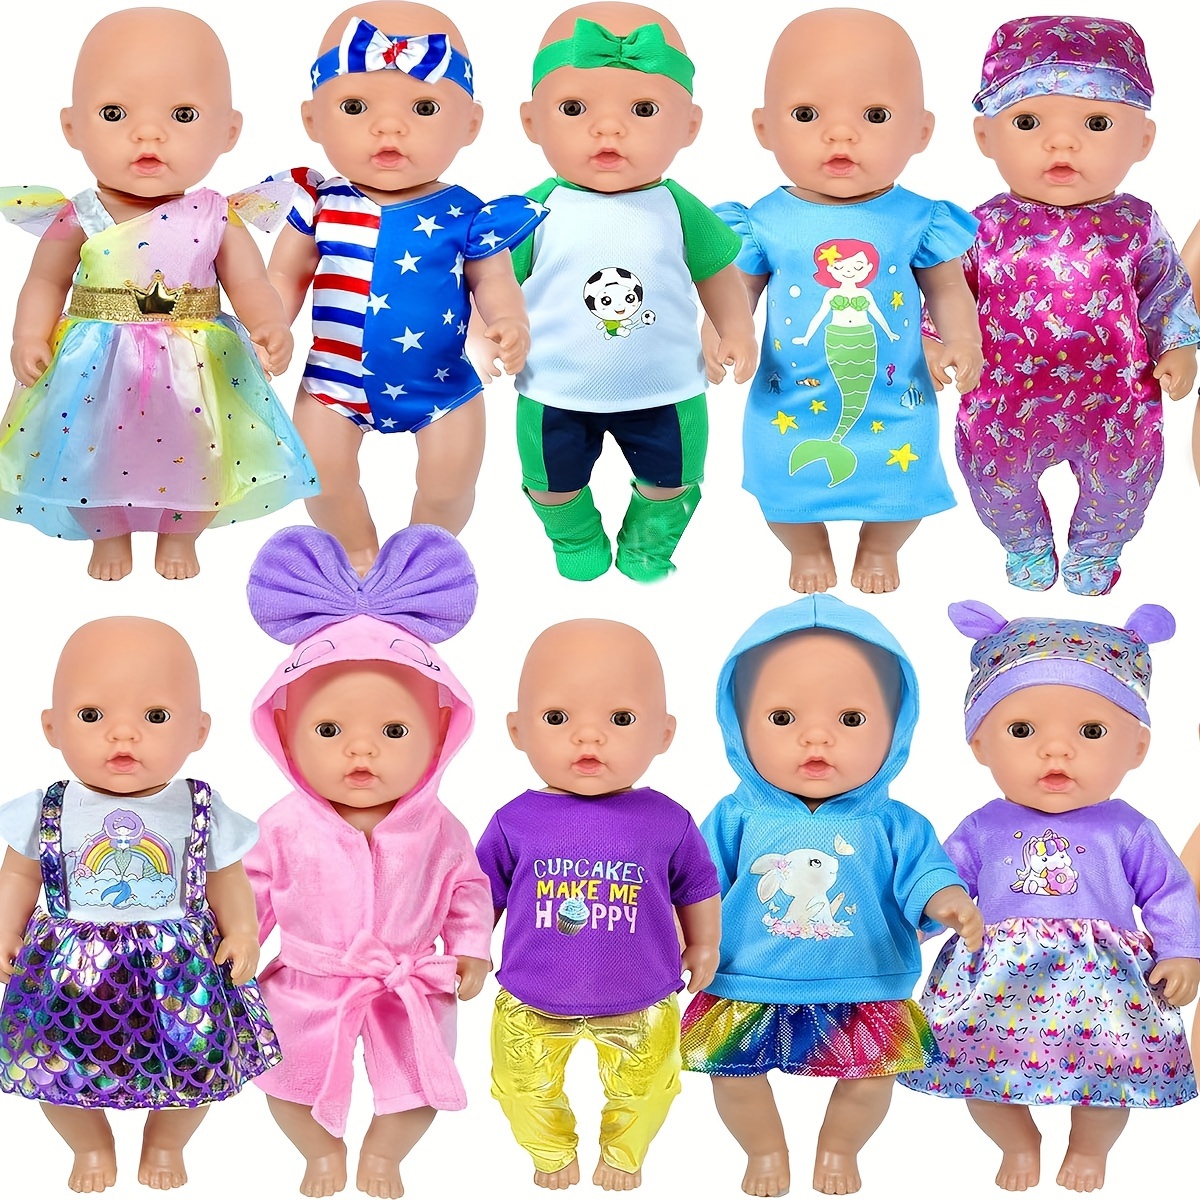 12 Sets Baby Doll Clothes for 12 13 14 Inch Dolls, Alive Doll Clothes  Colorful Princess Dress, Romper, Sweater Costume, Cute Alive Doll  Accessories